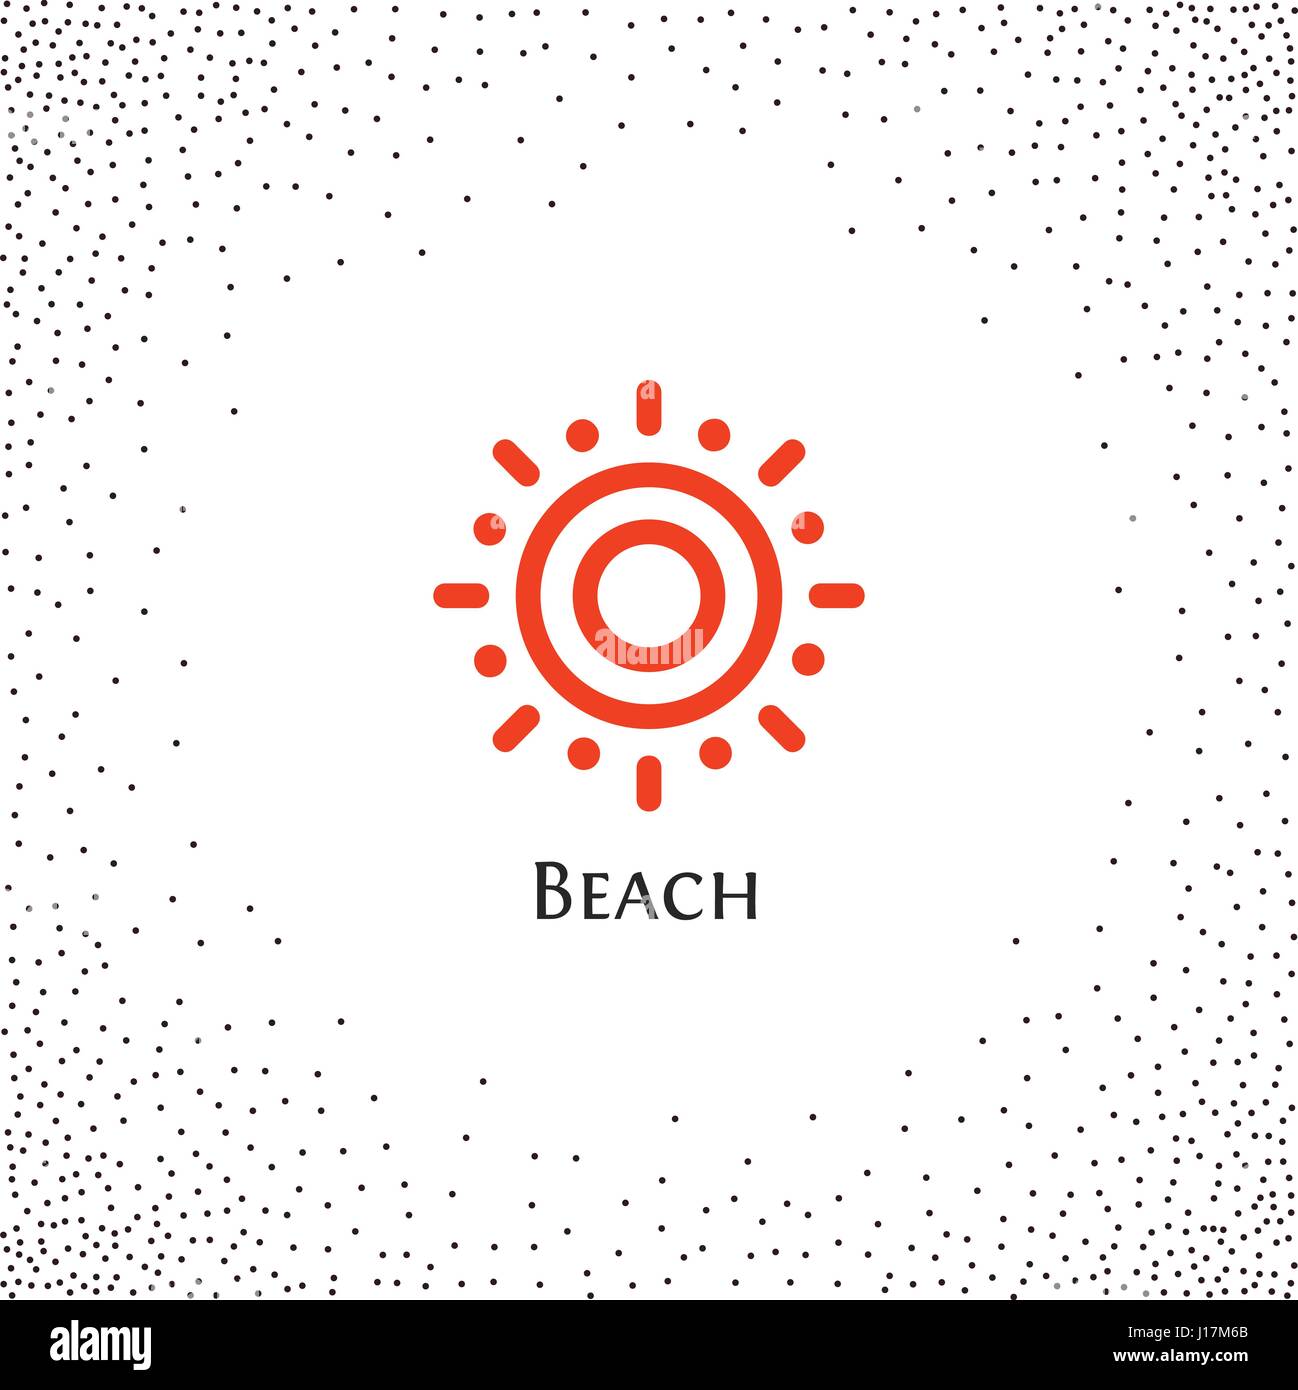 Isolated abstract round shape orange color logo, sun logotype vector illustration on a background of dots Stock Vector